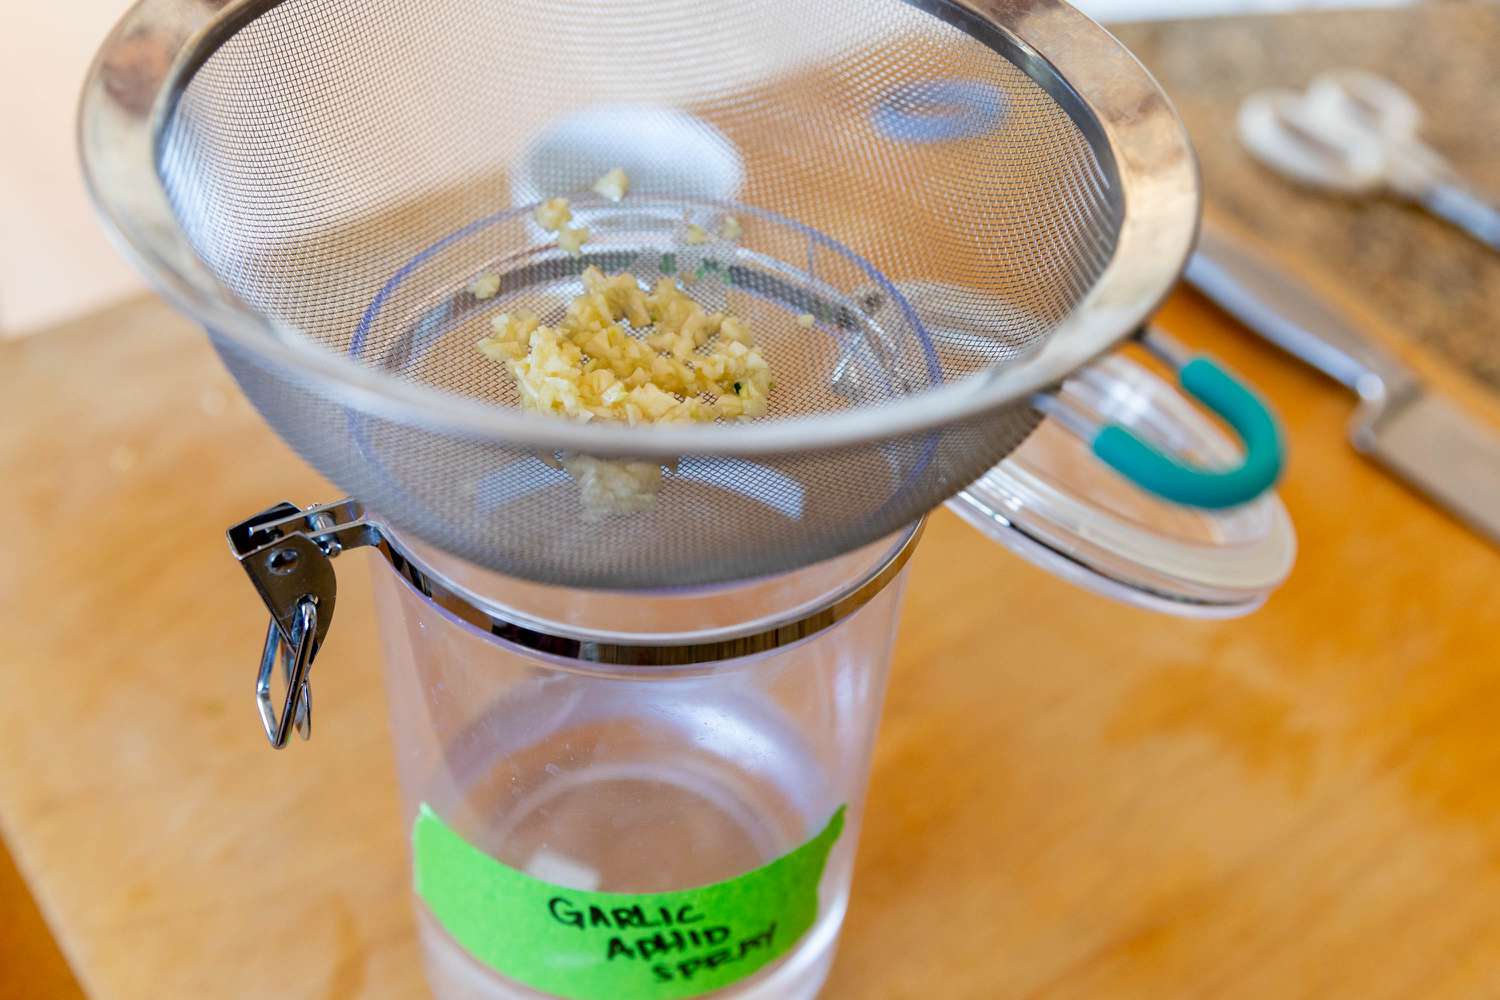 Chopped garlic being strained over glass container for aphid spray